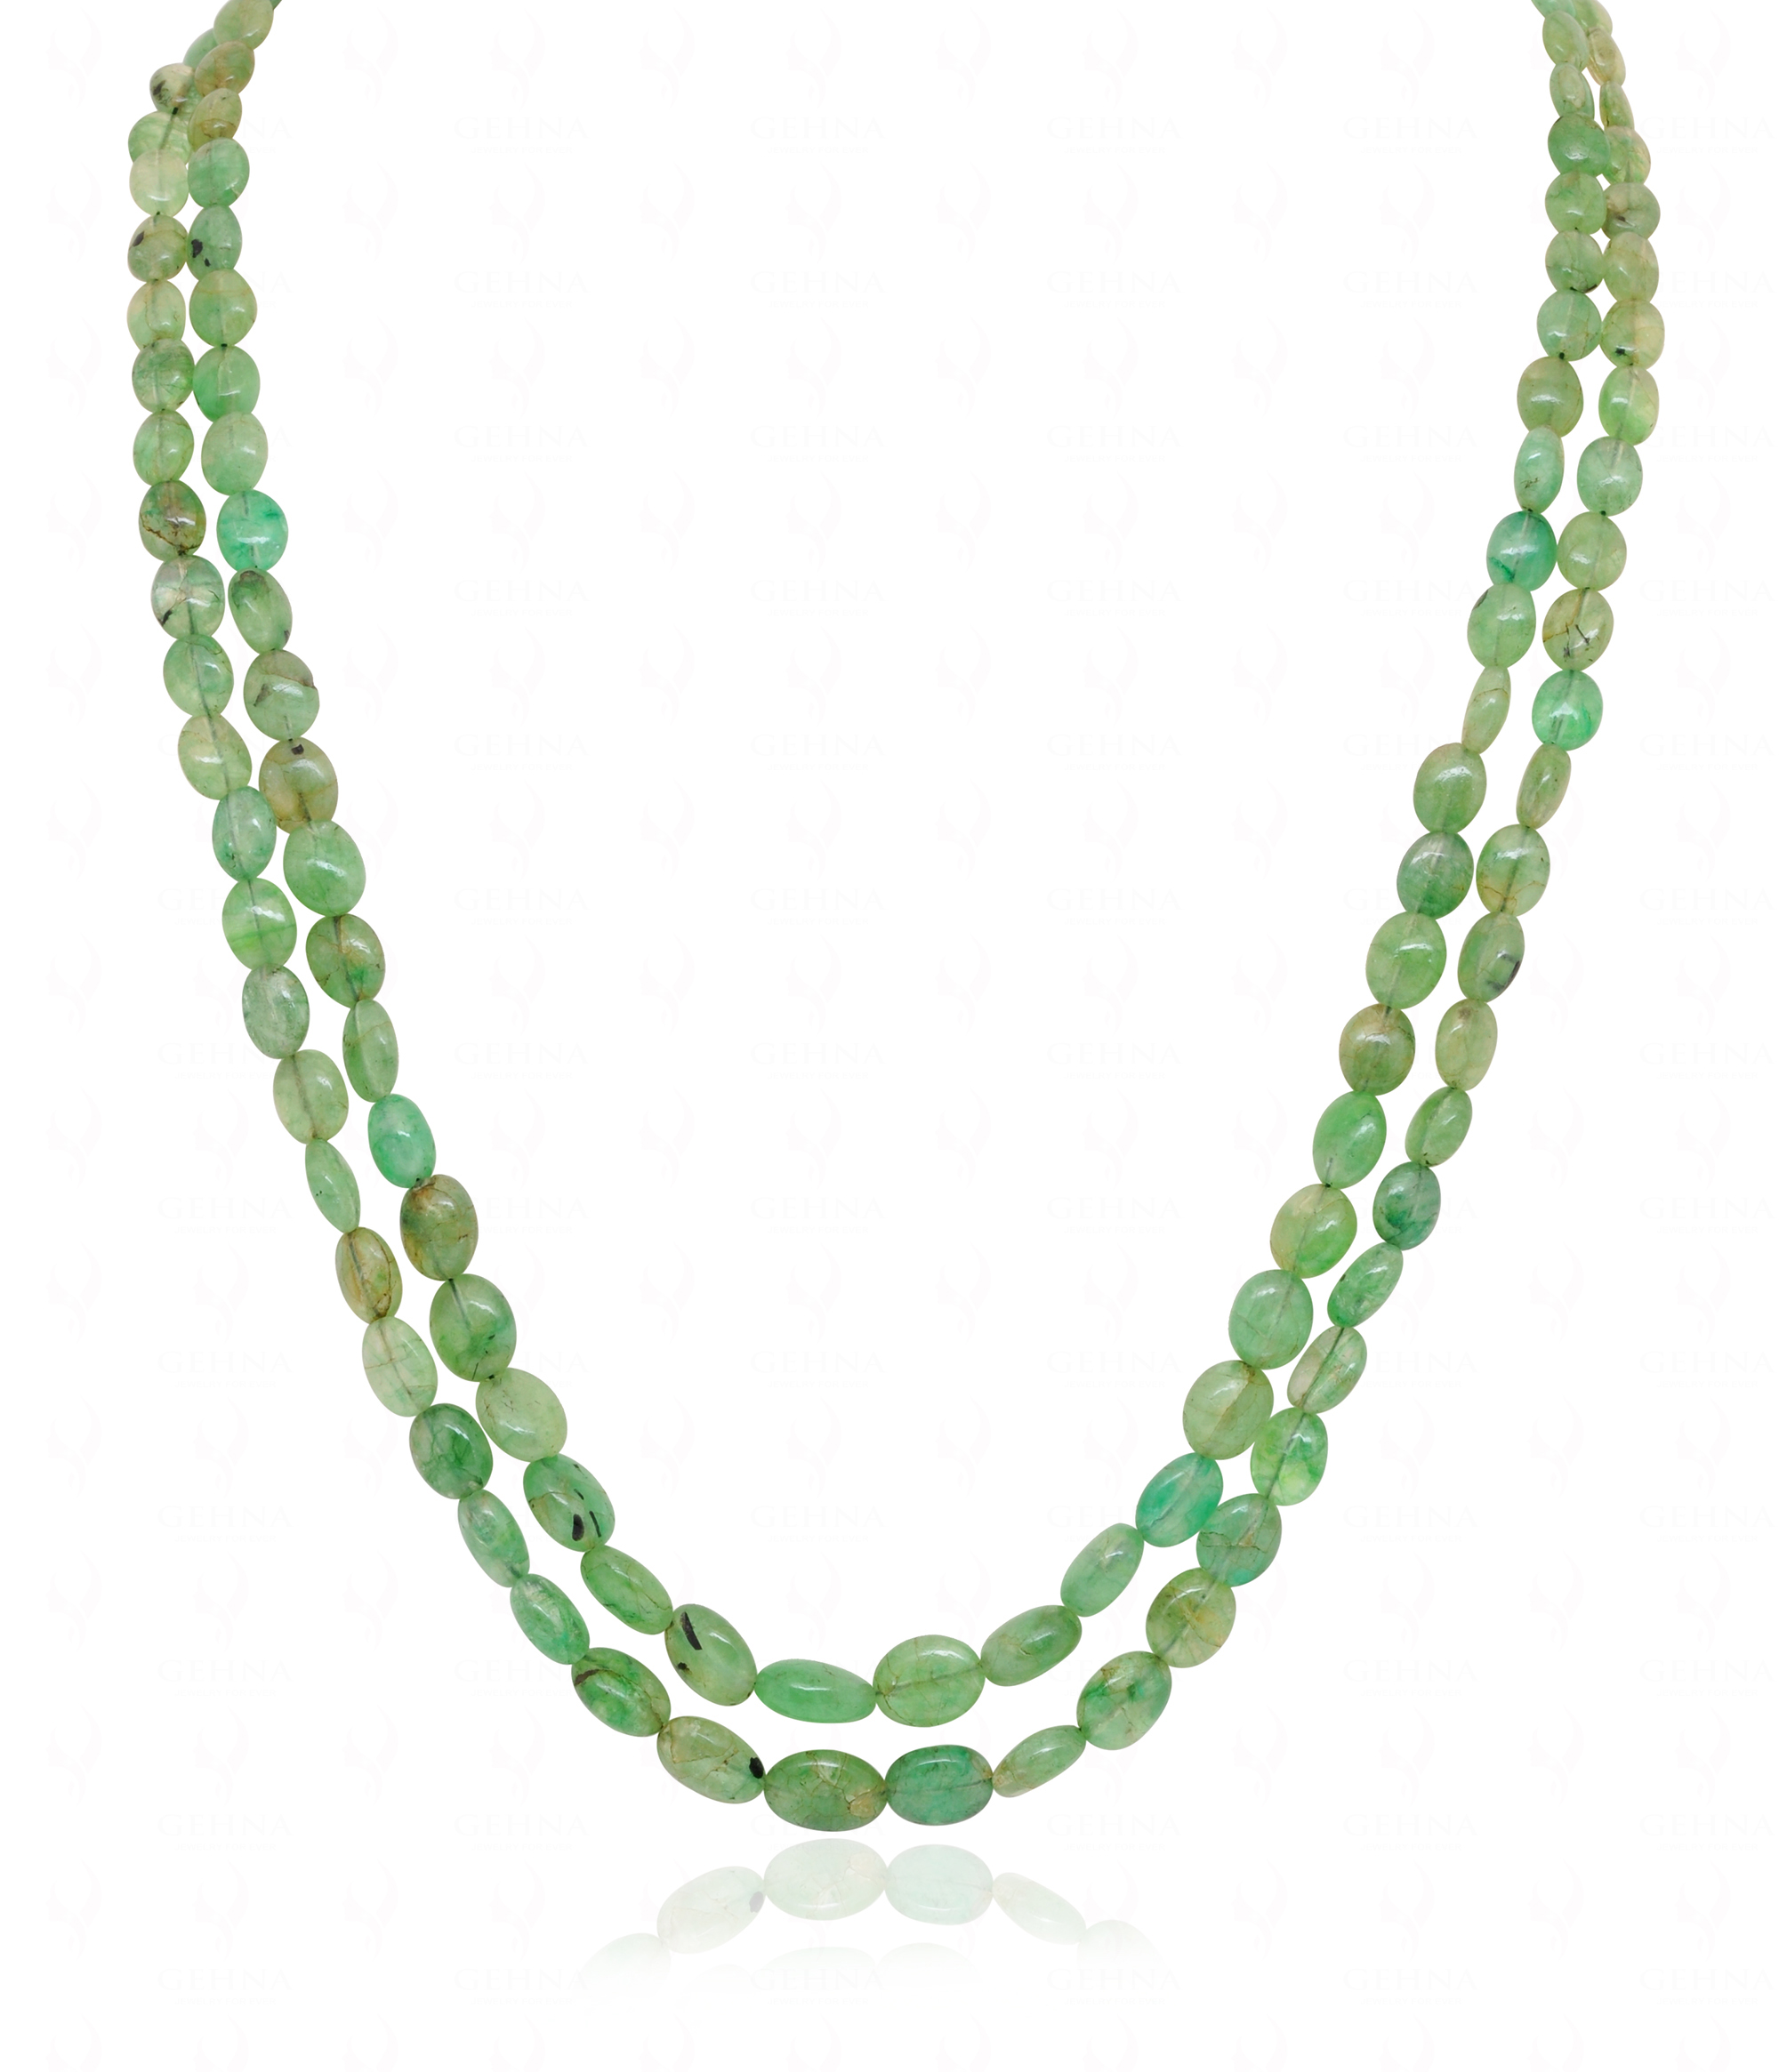 Emerald Gemstone Oval Bead Necklace NP-1490